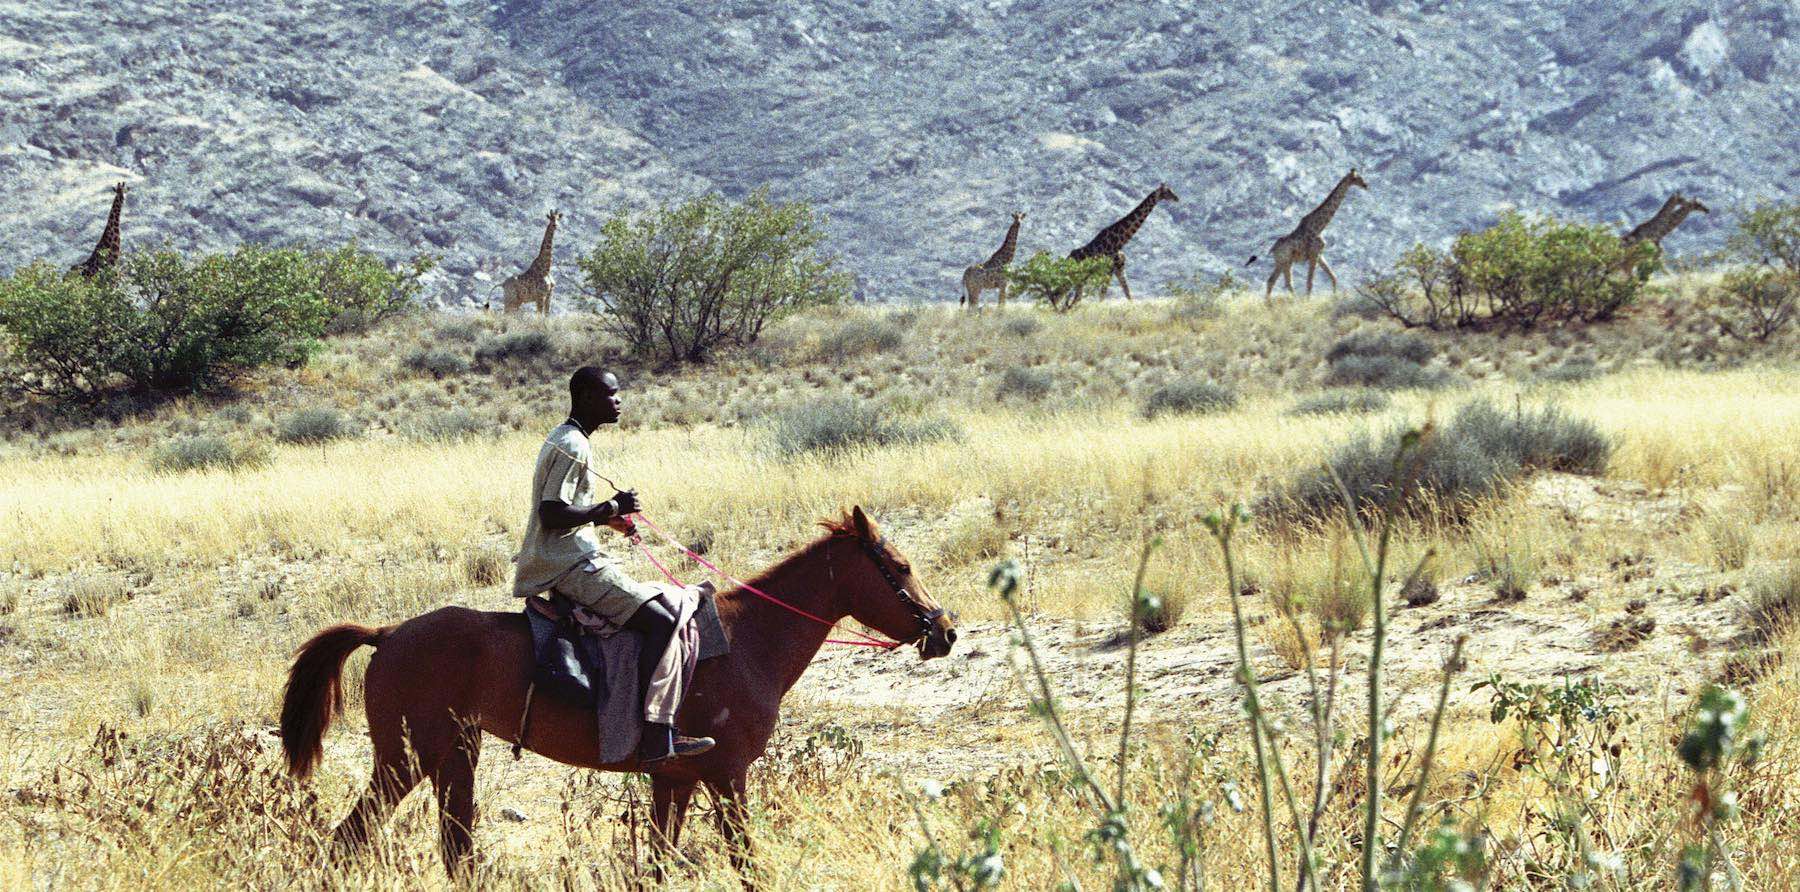 A game guard on horseback with a group of giraffe in the background.